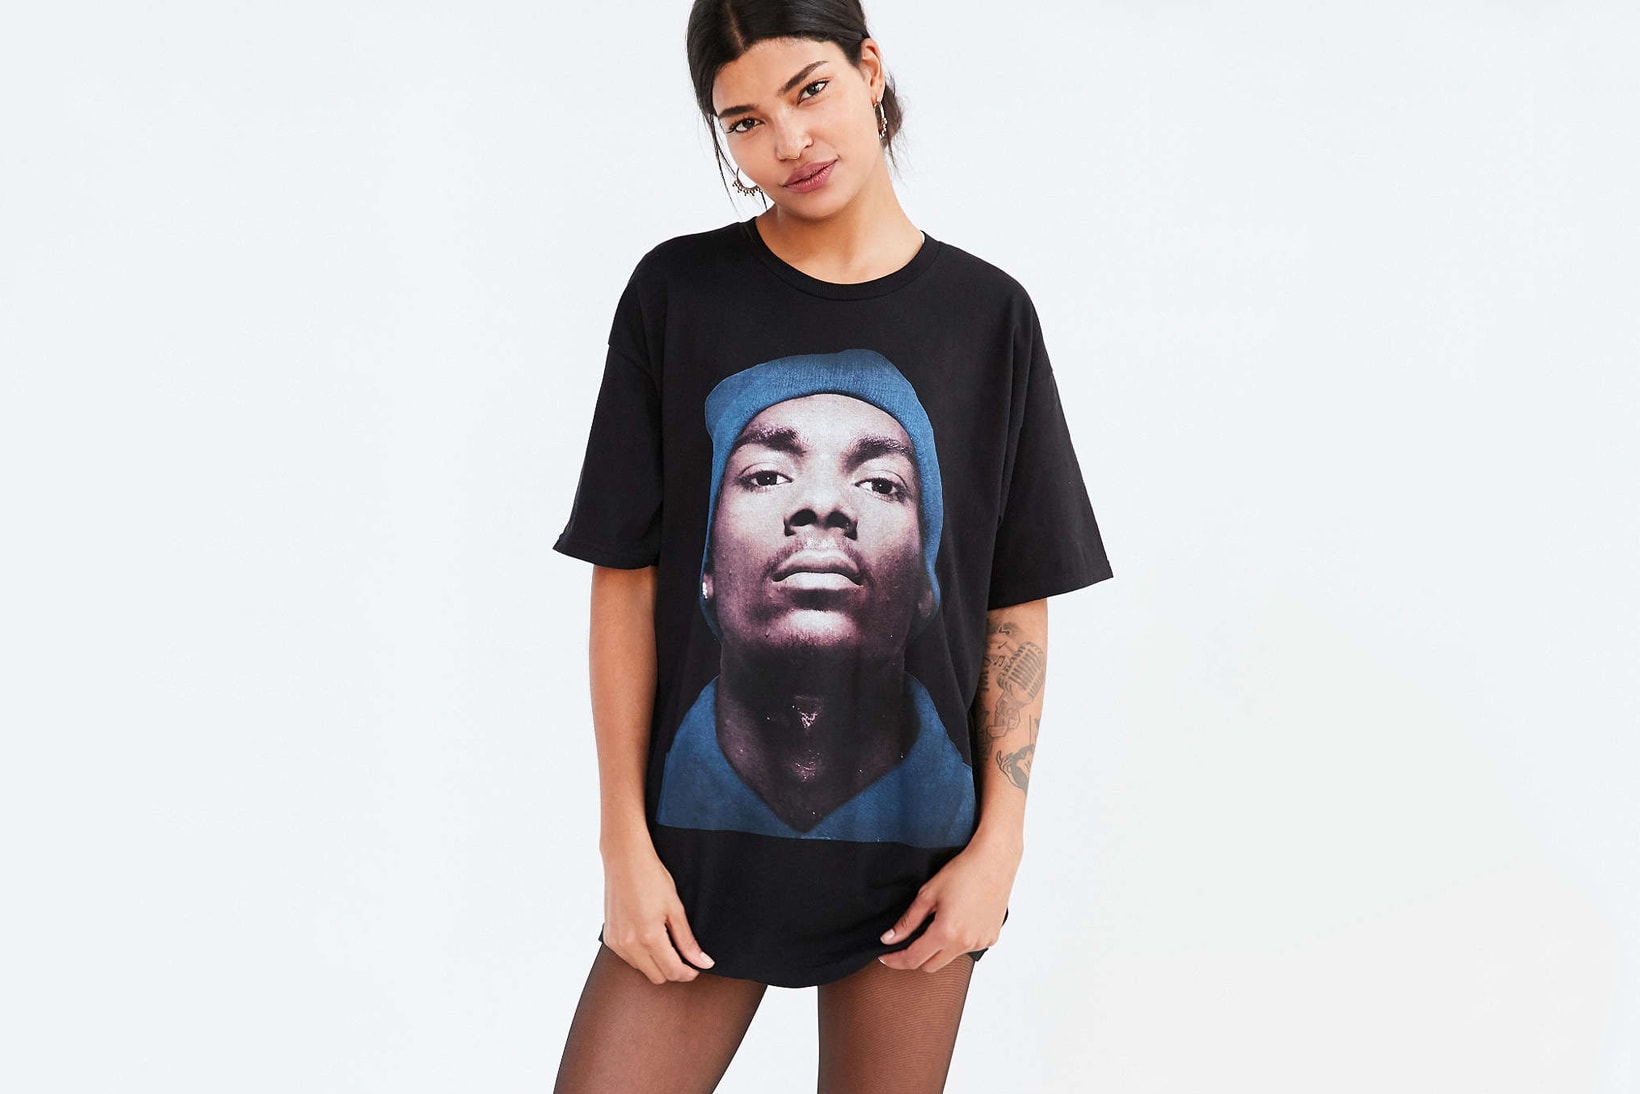 Urban Outfitters Vetements 920 USD Snoop Dogg T Shirt